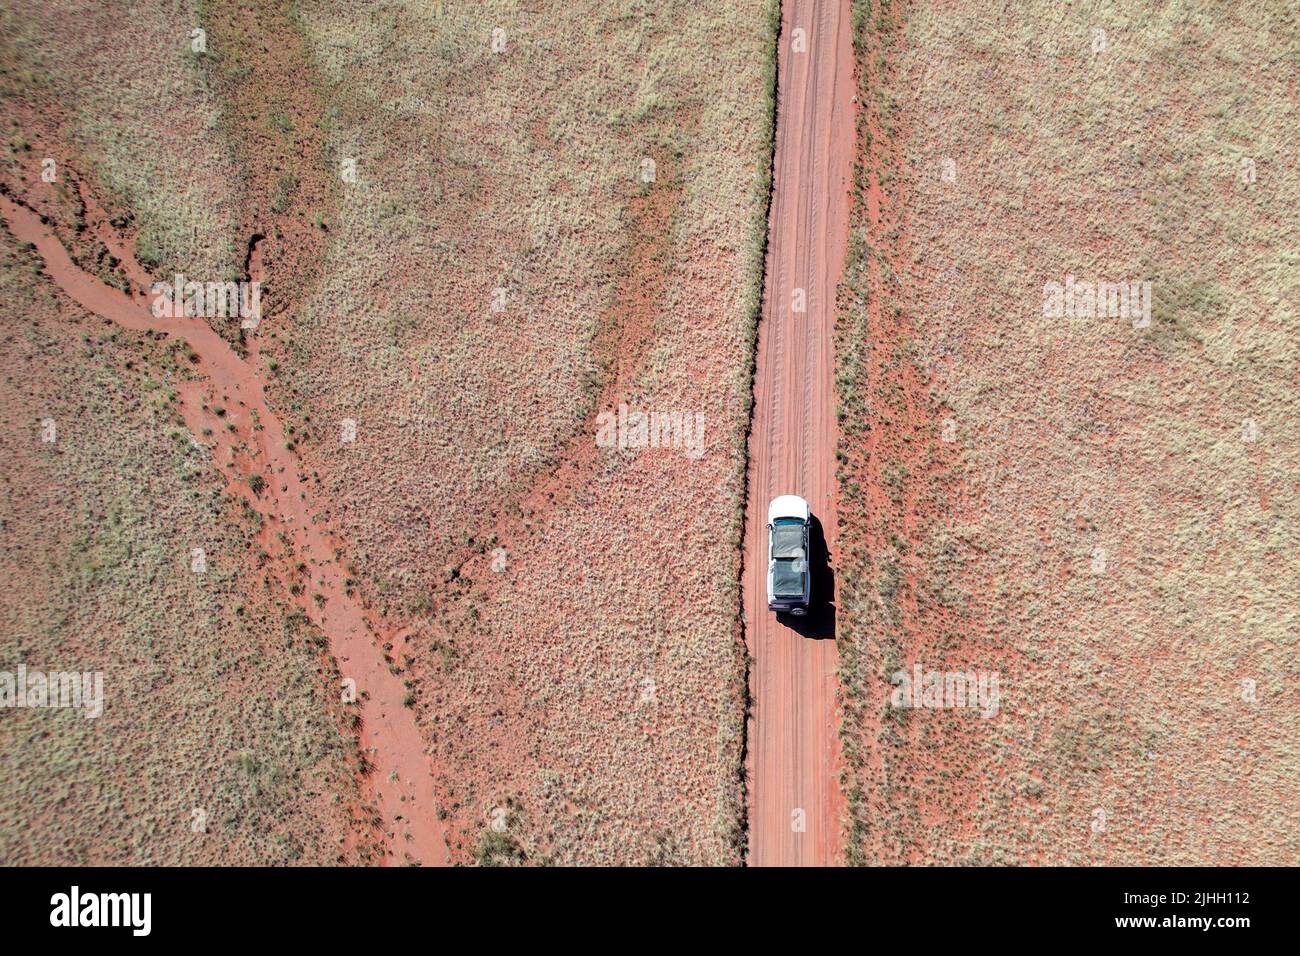 Drone shot of a car on a red gravel road in Namibia Africa Stock Photo